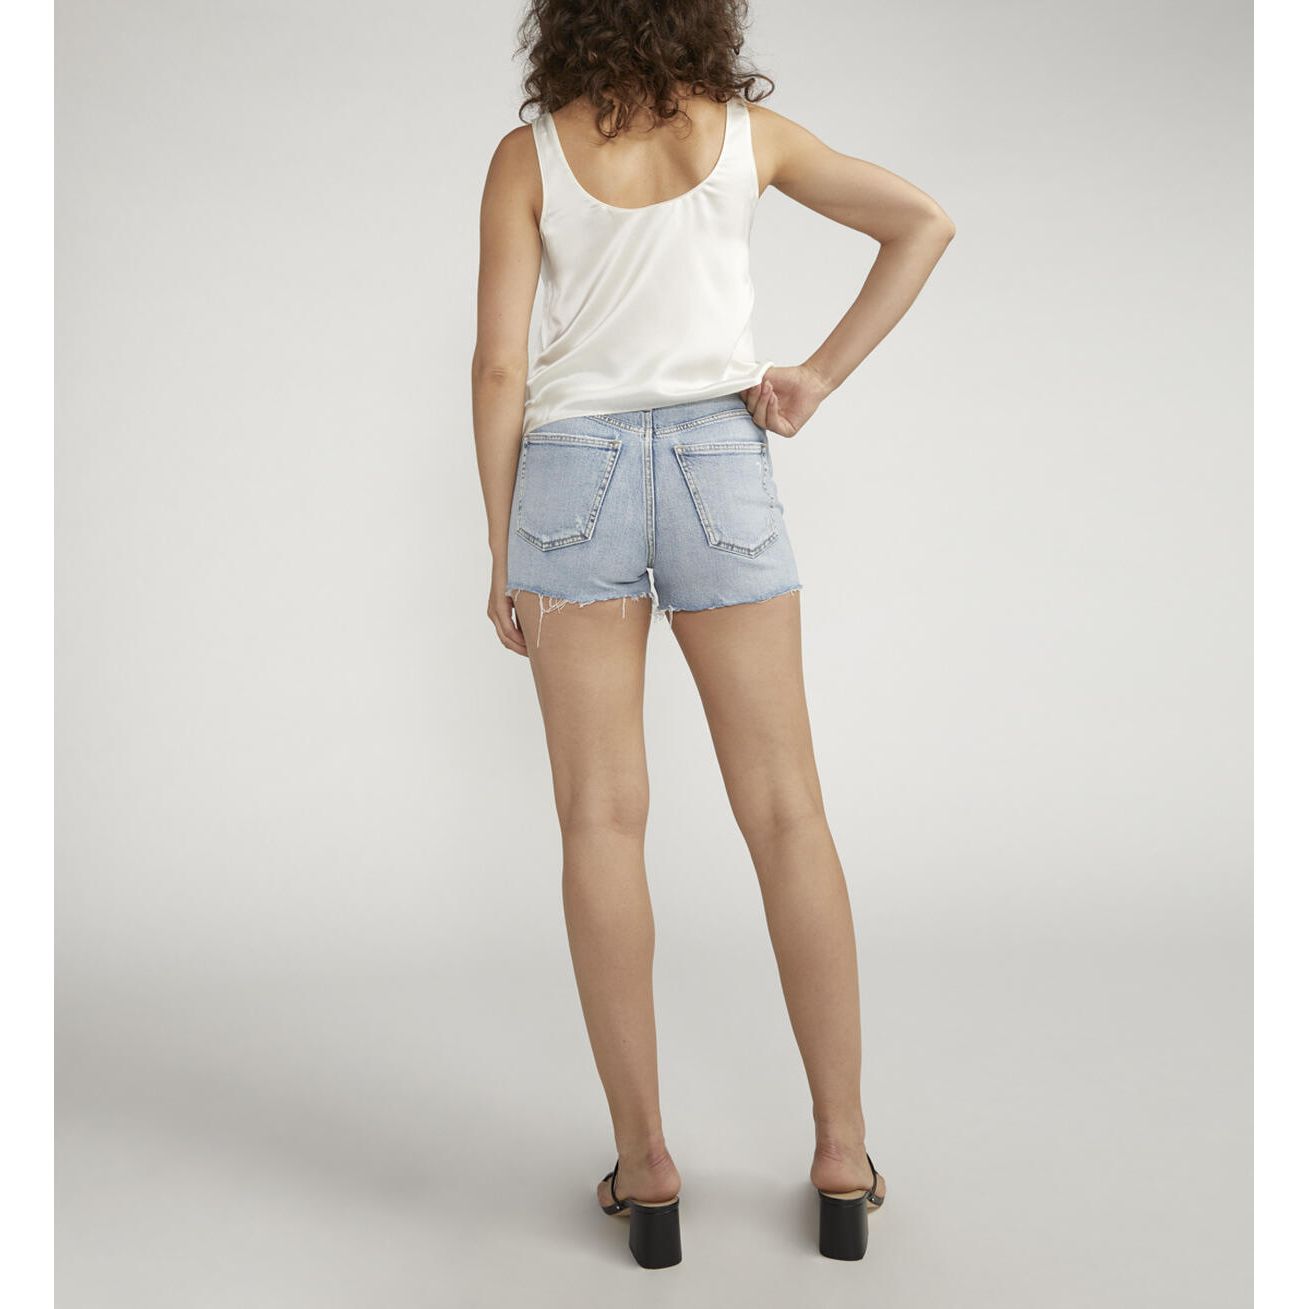 Silver Jeans - Highly Desirable Jean Shorts in L28519RCS219